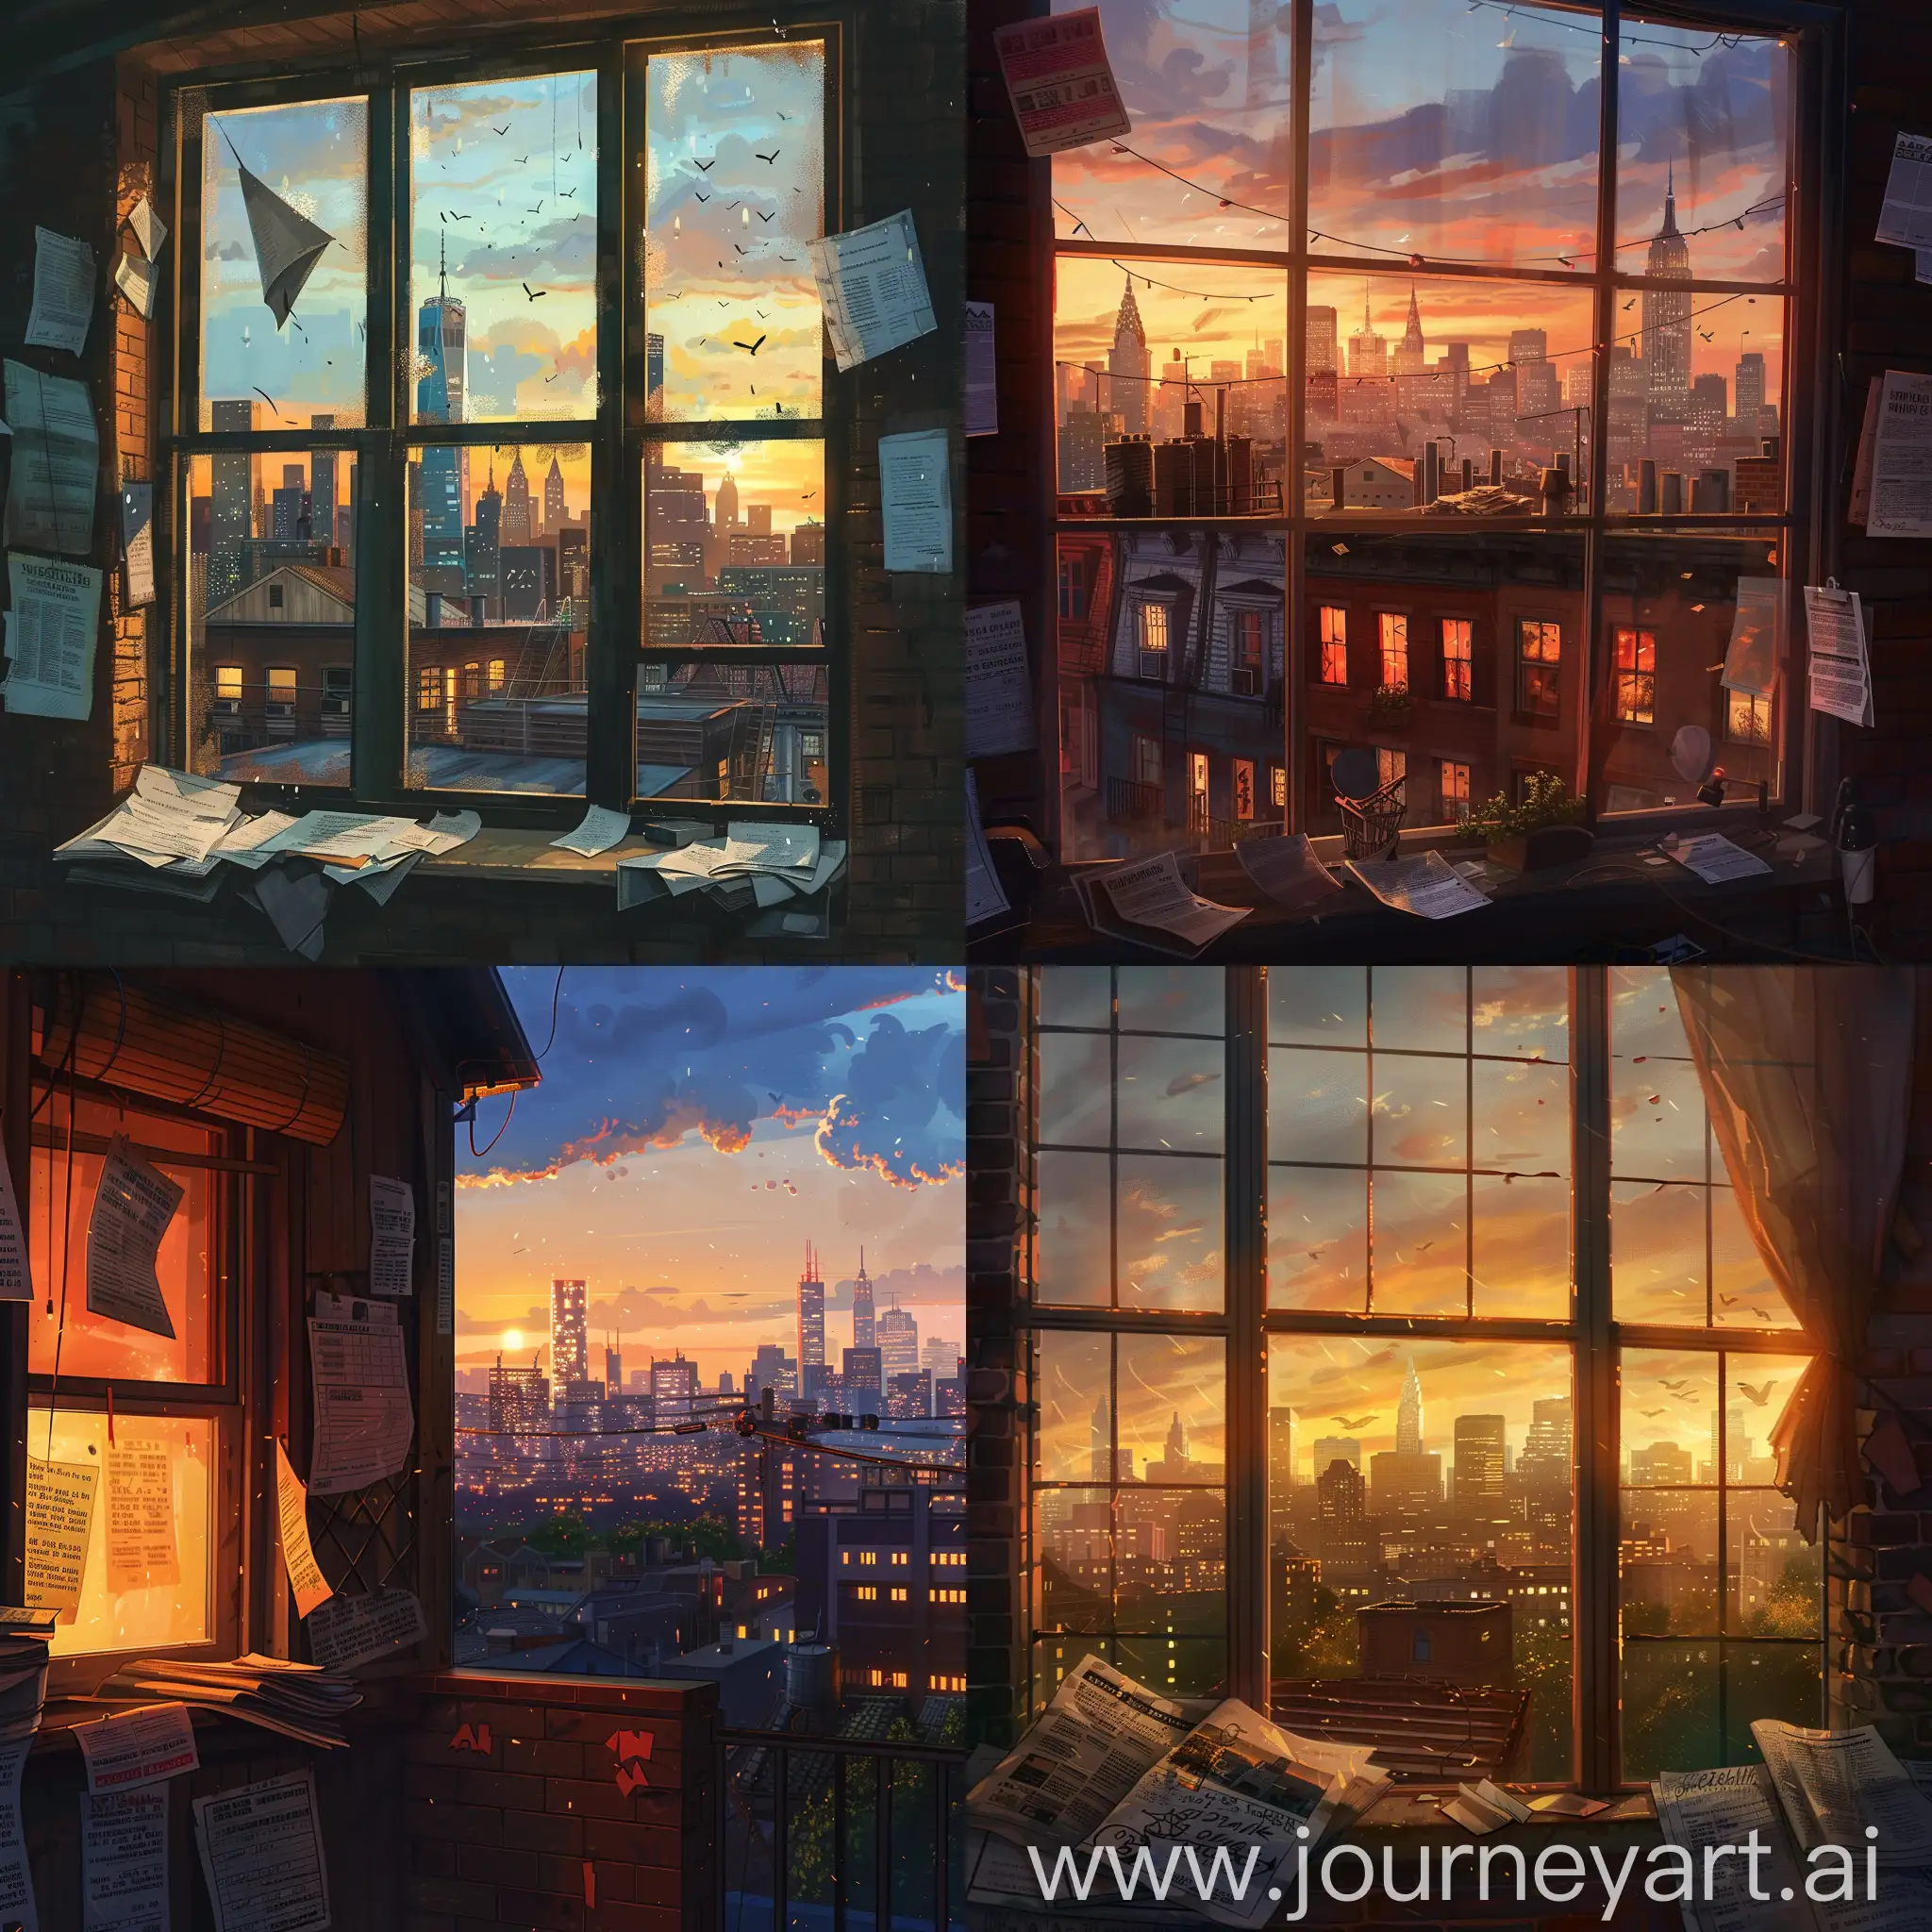 Background of daytime lighting, hustle and bustle city, papers and school supplements, modest home, financial struggles, window, rooftop, overlooking skyline, painting beautiful picture, warm glow, dusk, motivational quotes.
